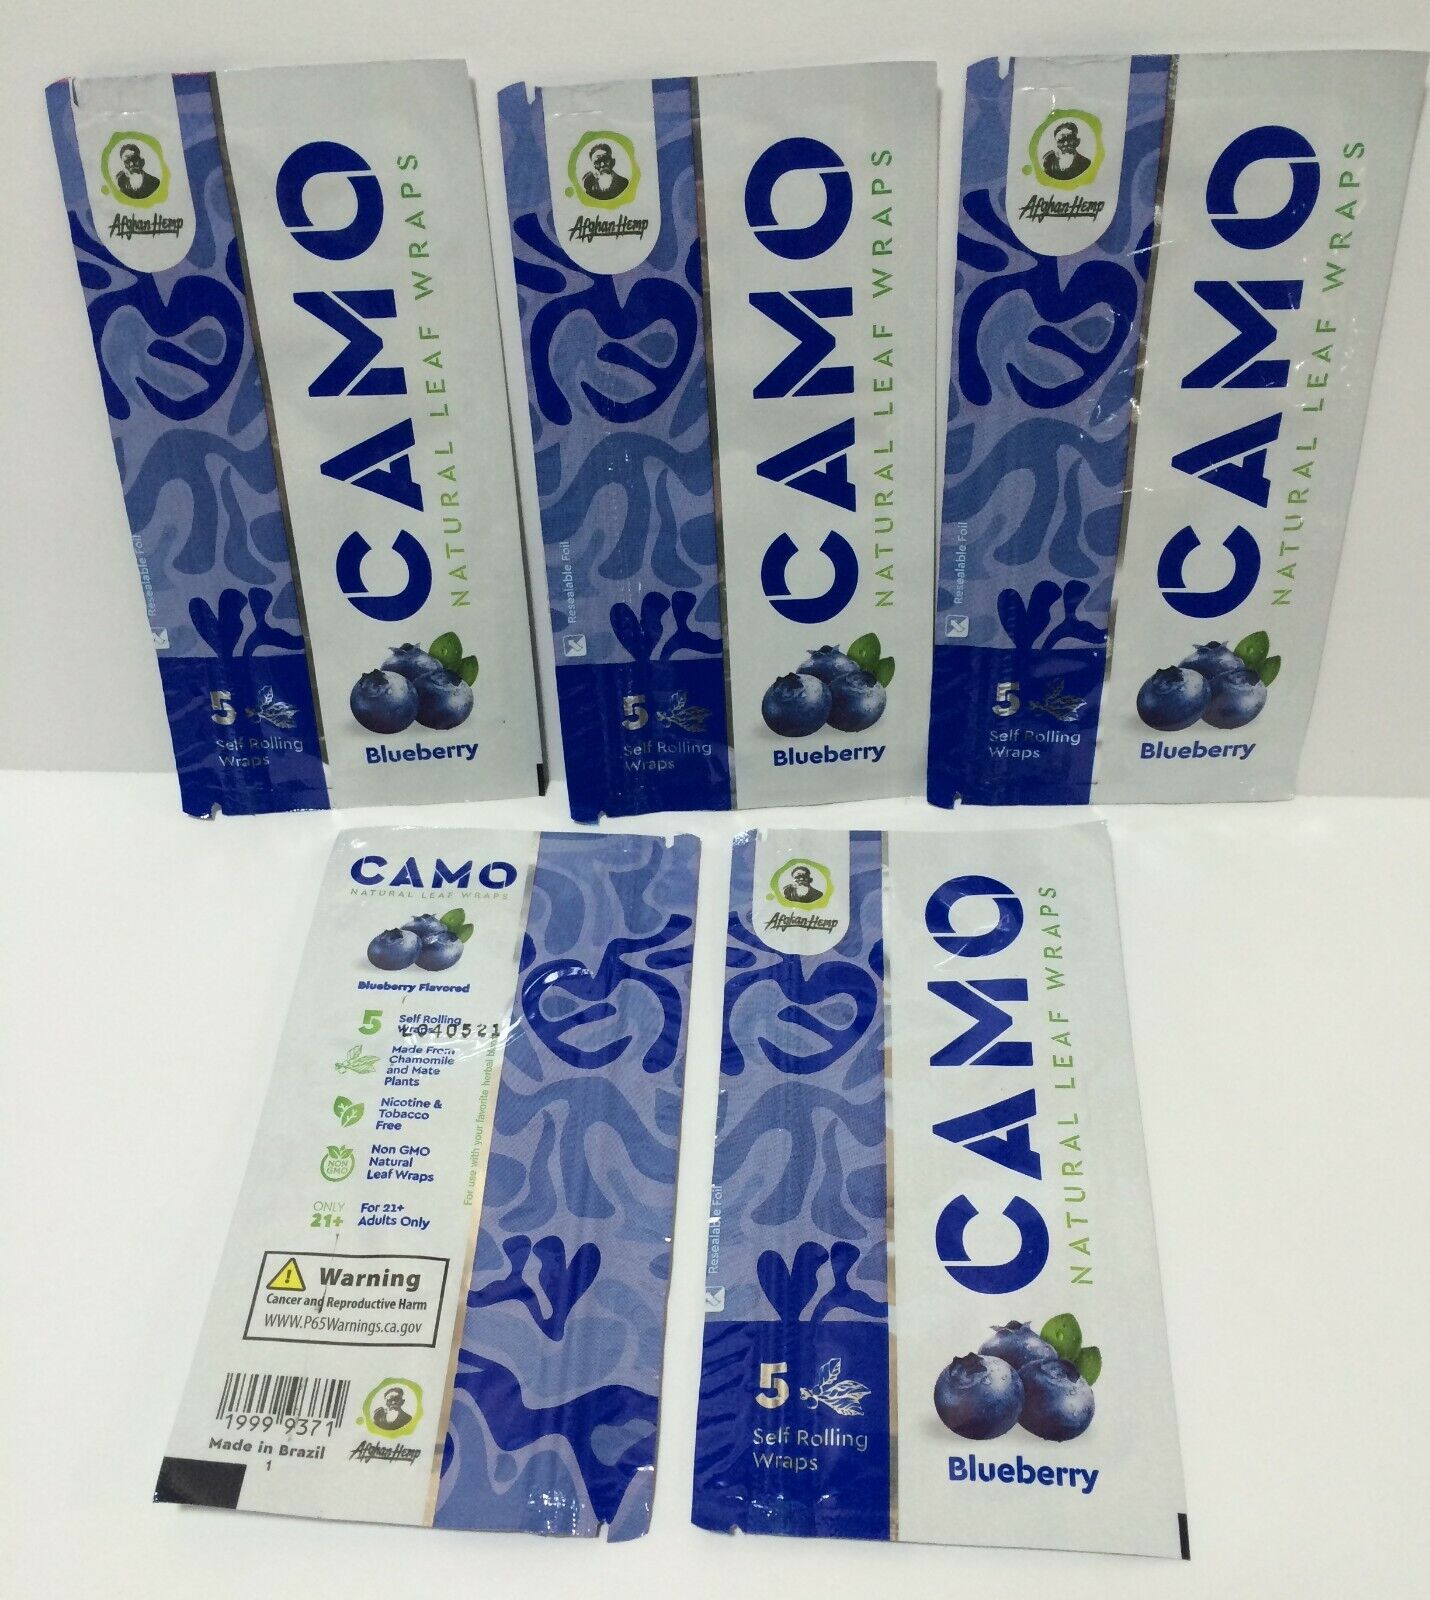 5 PACKS of CAMO NATURAL LEAF WRAPS - BLUEBERRY - 25 SHEETS HERBAL CHAMOMILE MATE